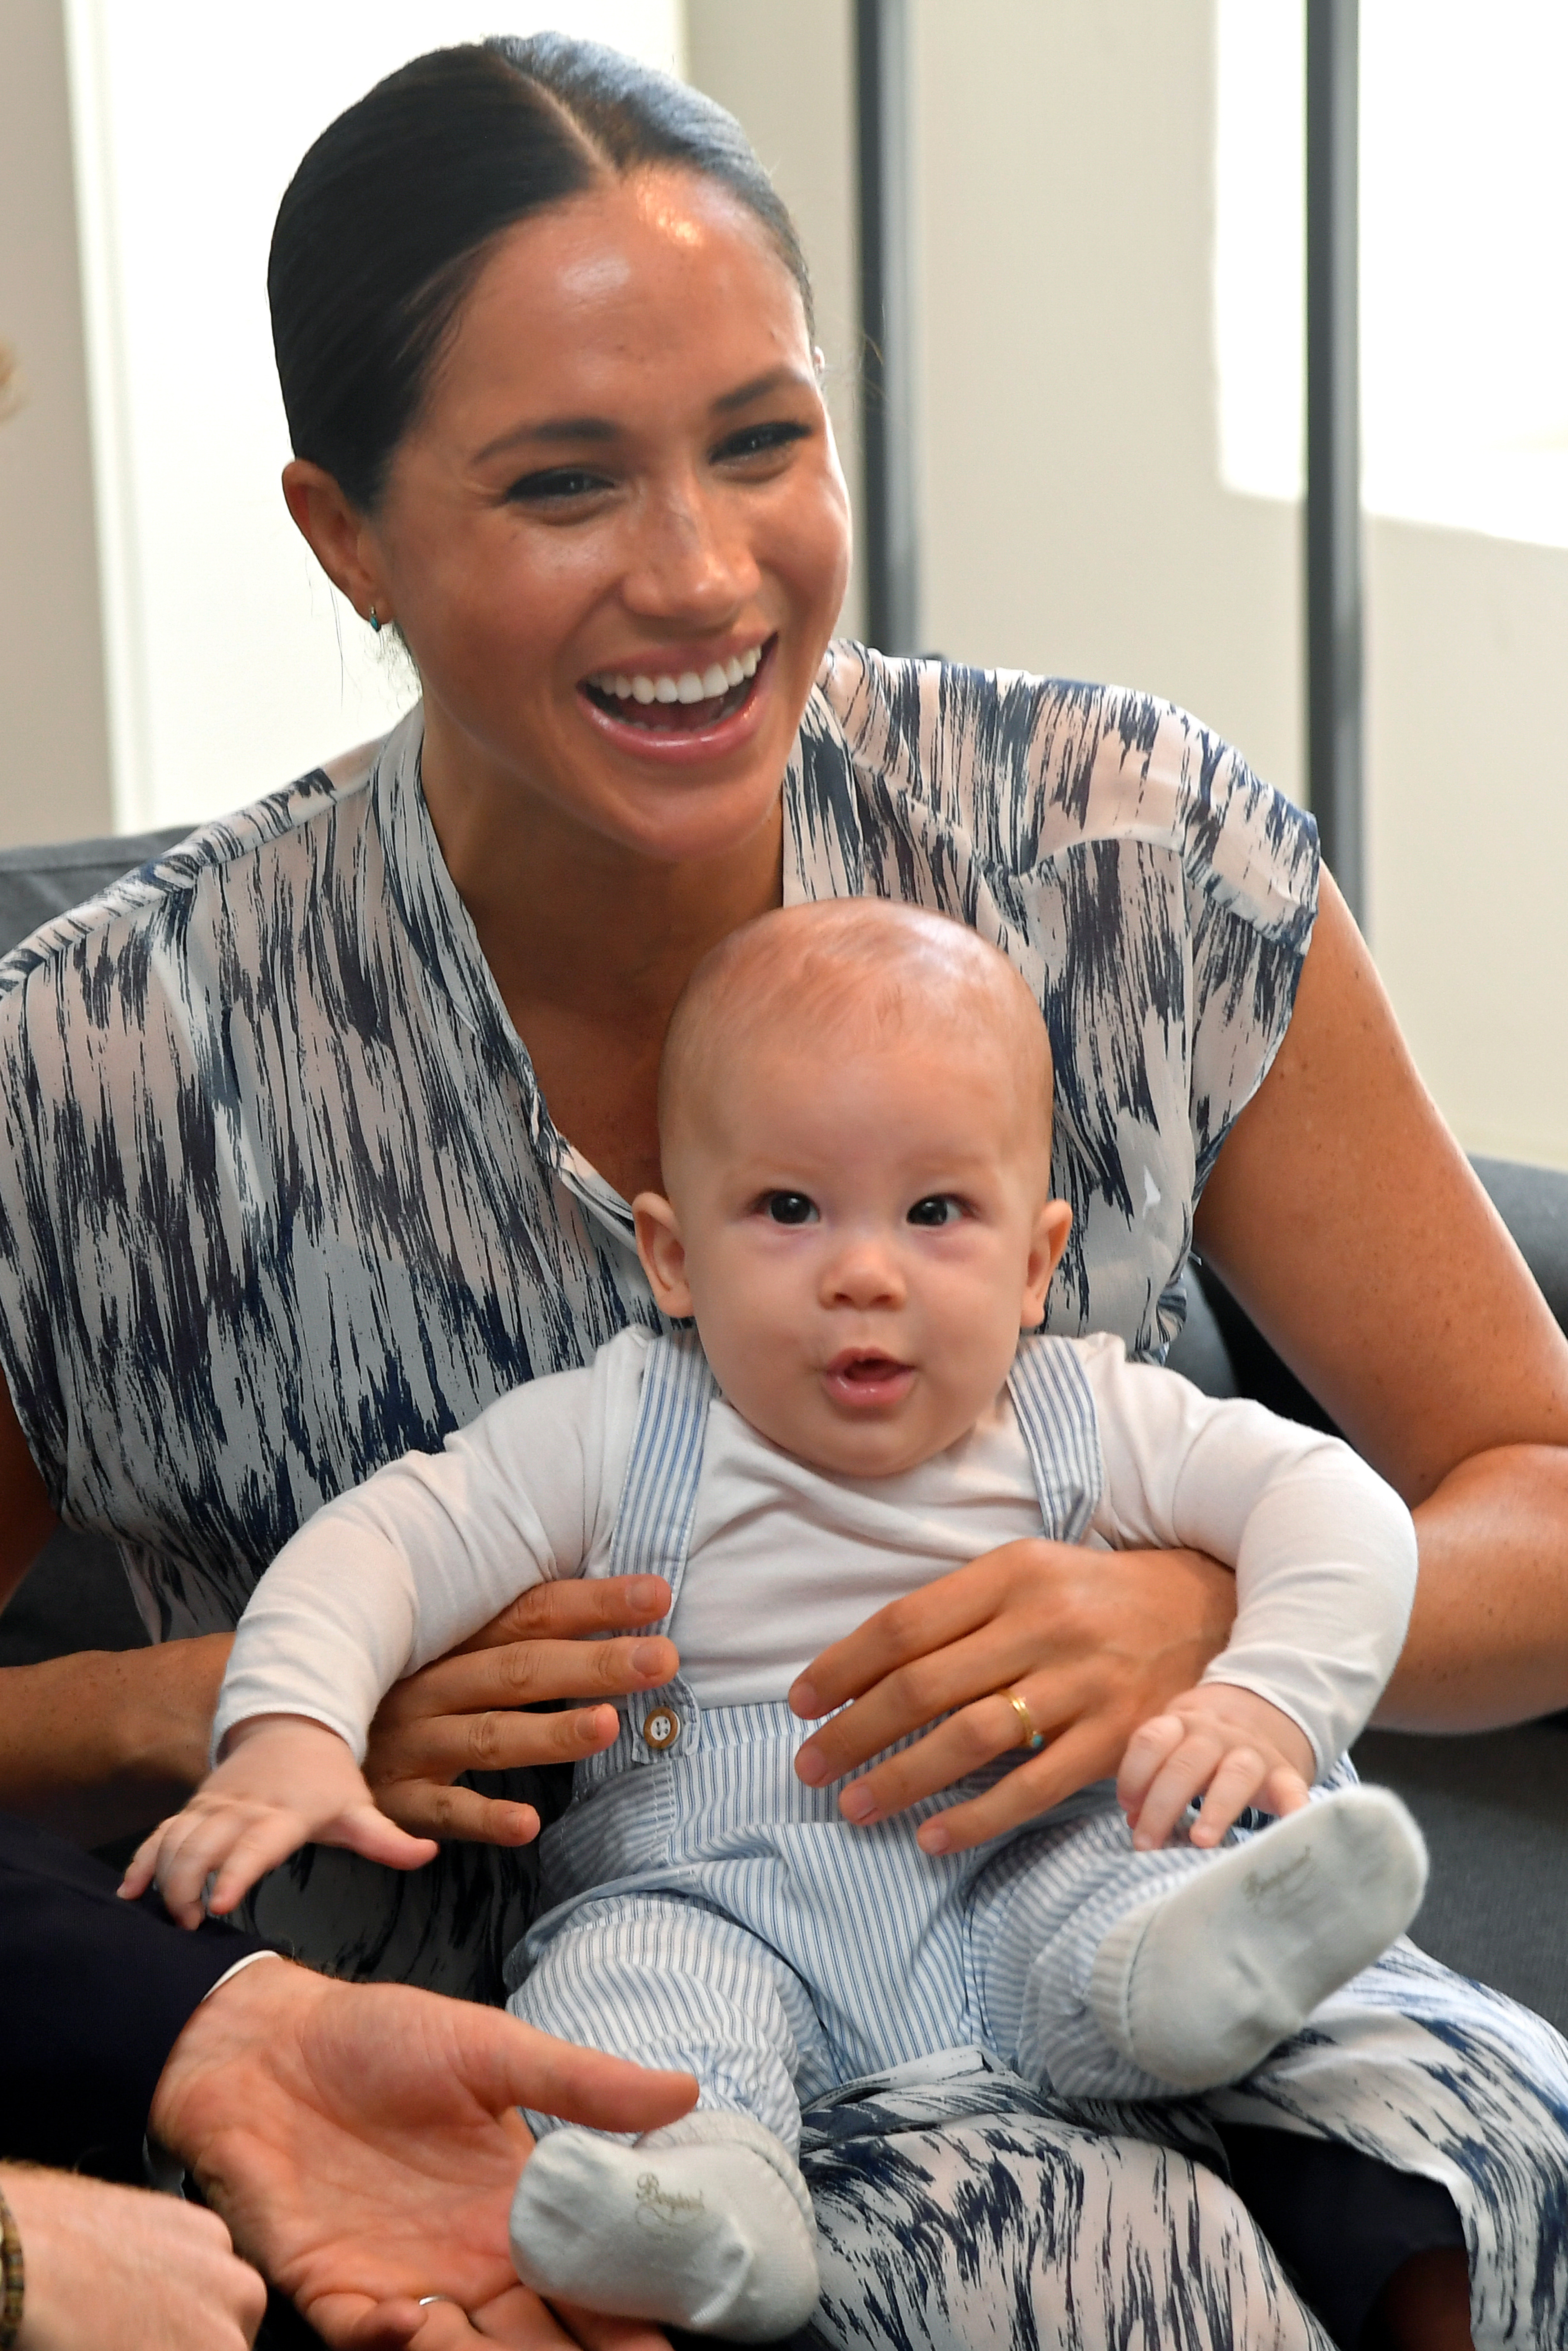 Meghan Markle and Archie Mountbatten-Windsor at a meeting with Archbishop Desmond Tutu during their royal tour of South Africa on September 25, 2019 in Cape Town, South Africa | Source: Getty Images